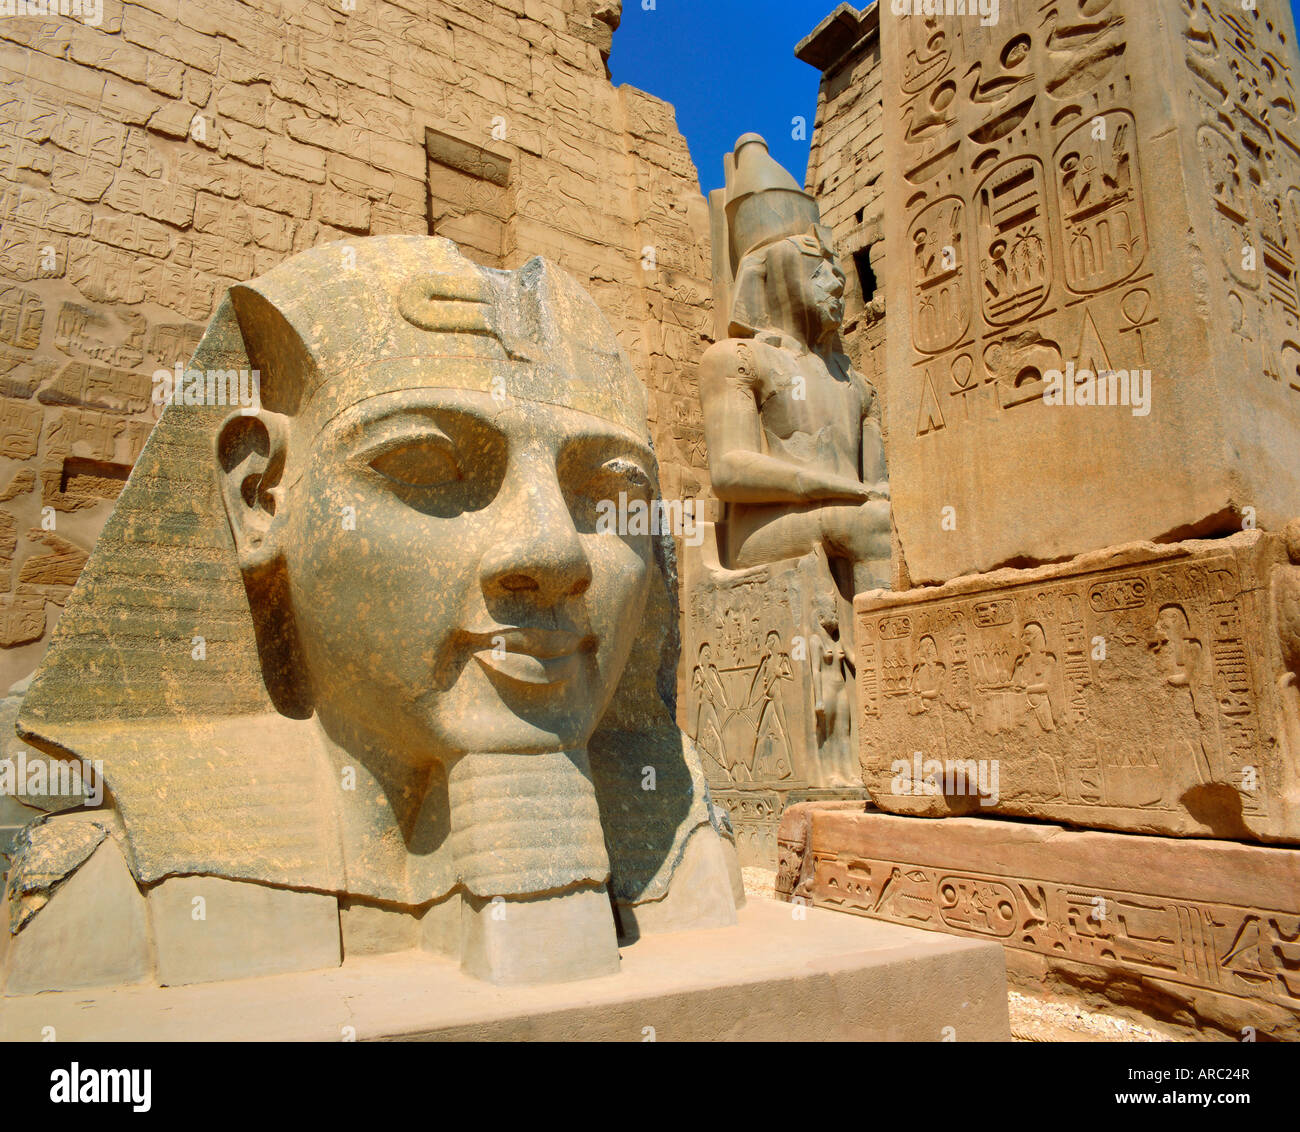 Statue of Ramses II and Obelisk, Luxor Temple, Luxor, Egypt, North Africa Stock Photo